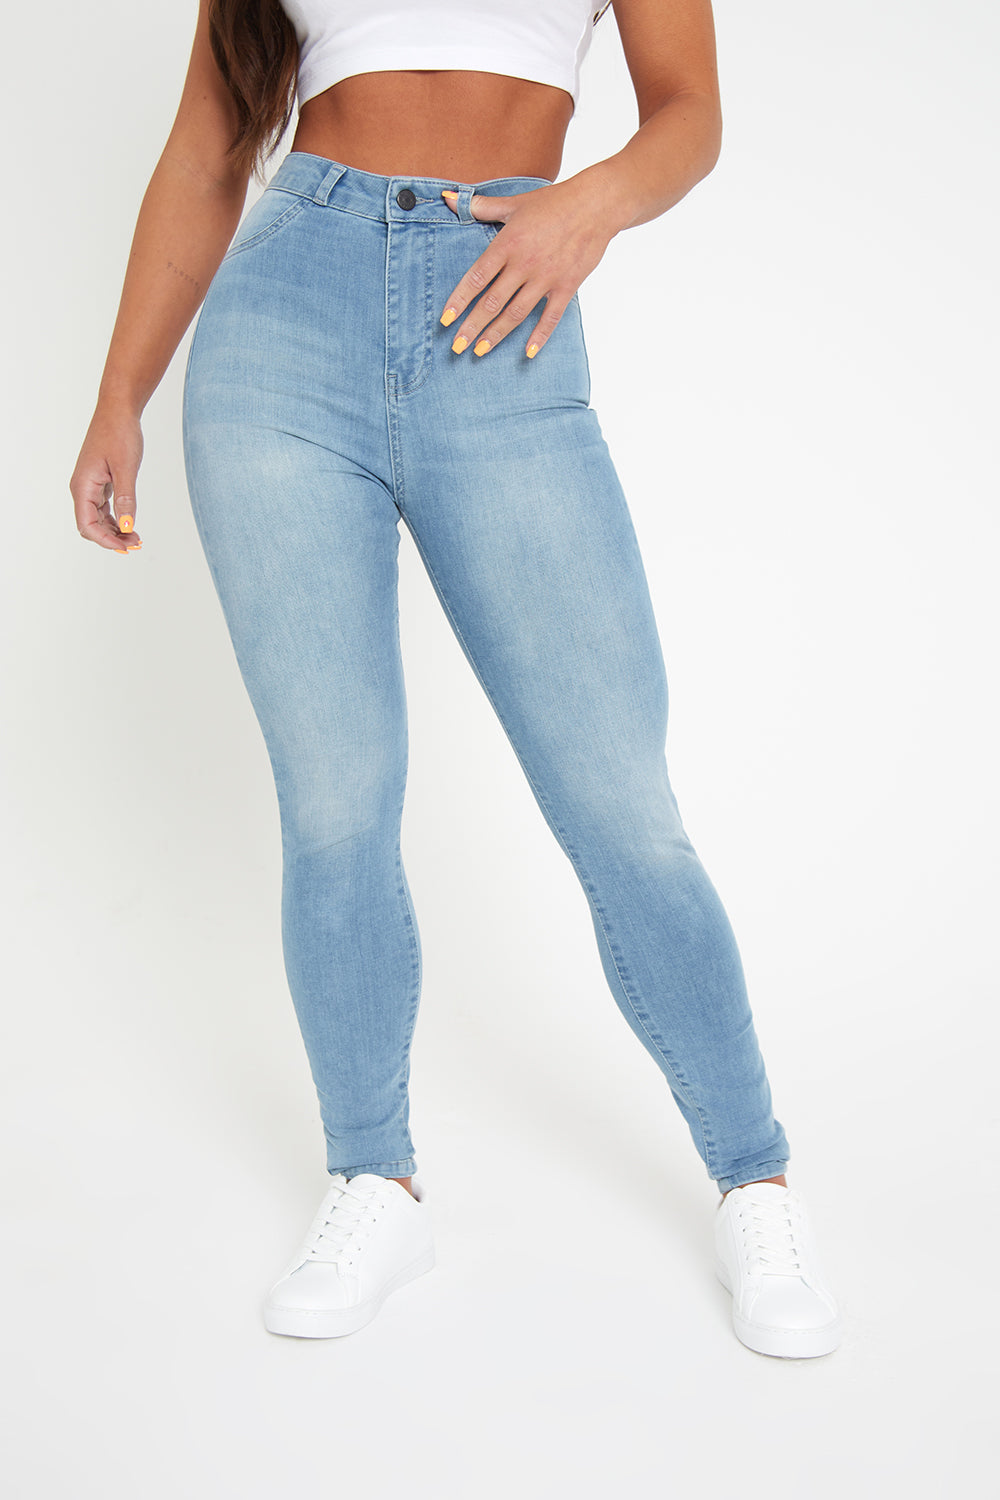 High Waisted Jeans Light Blue - TAILORED ATHLETE